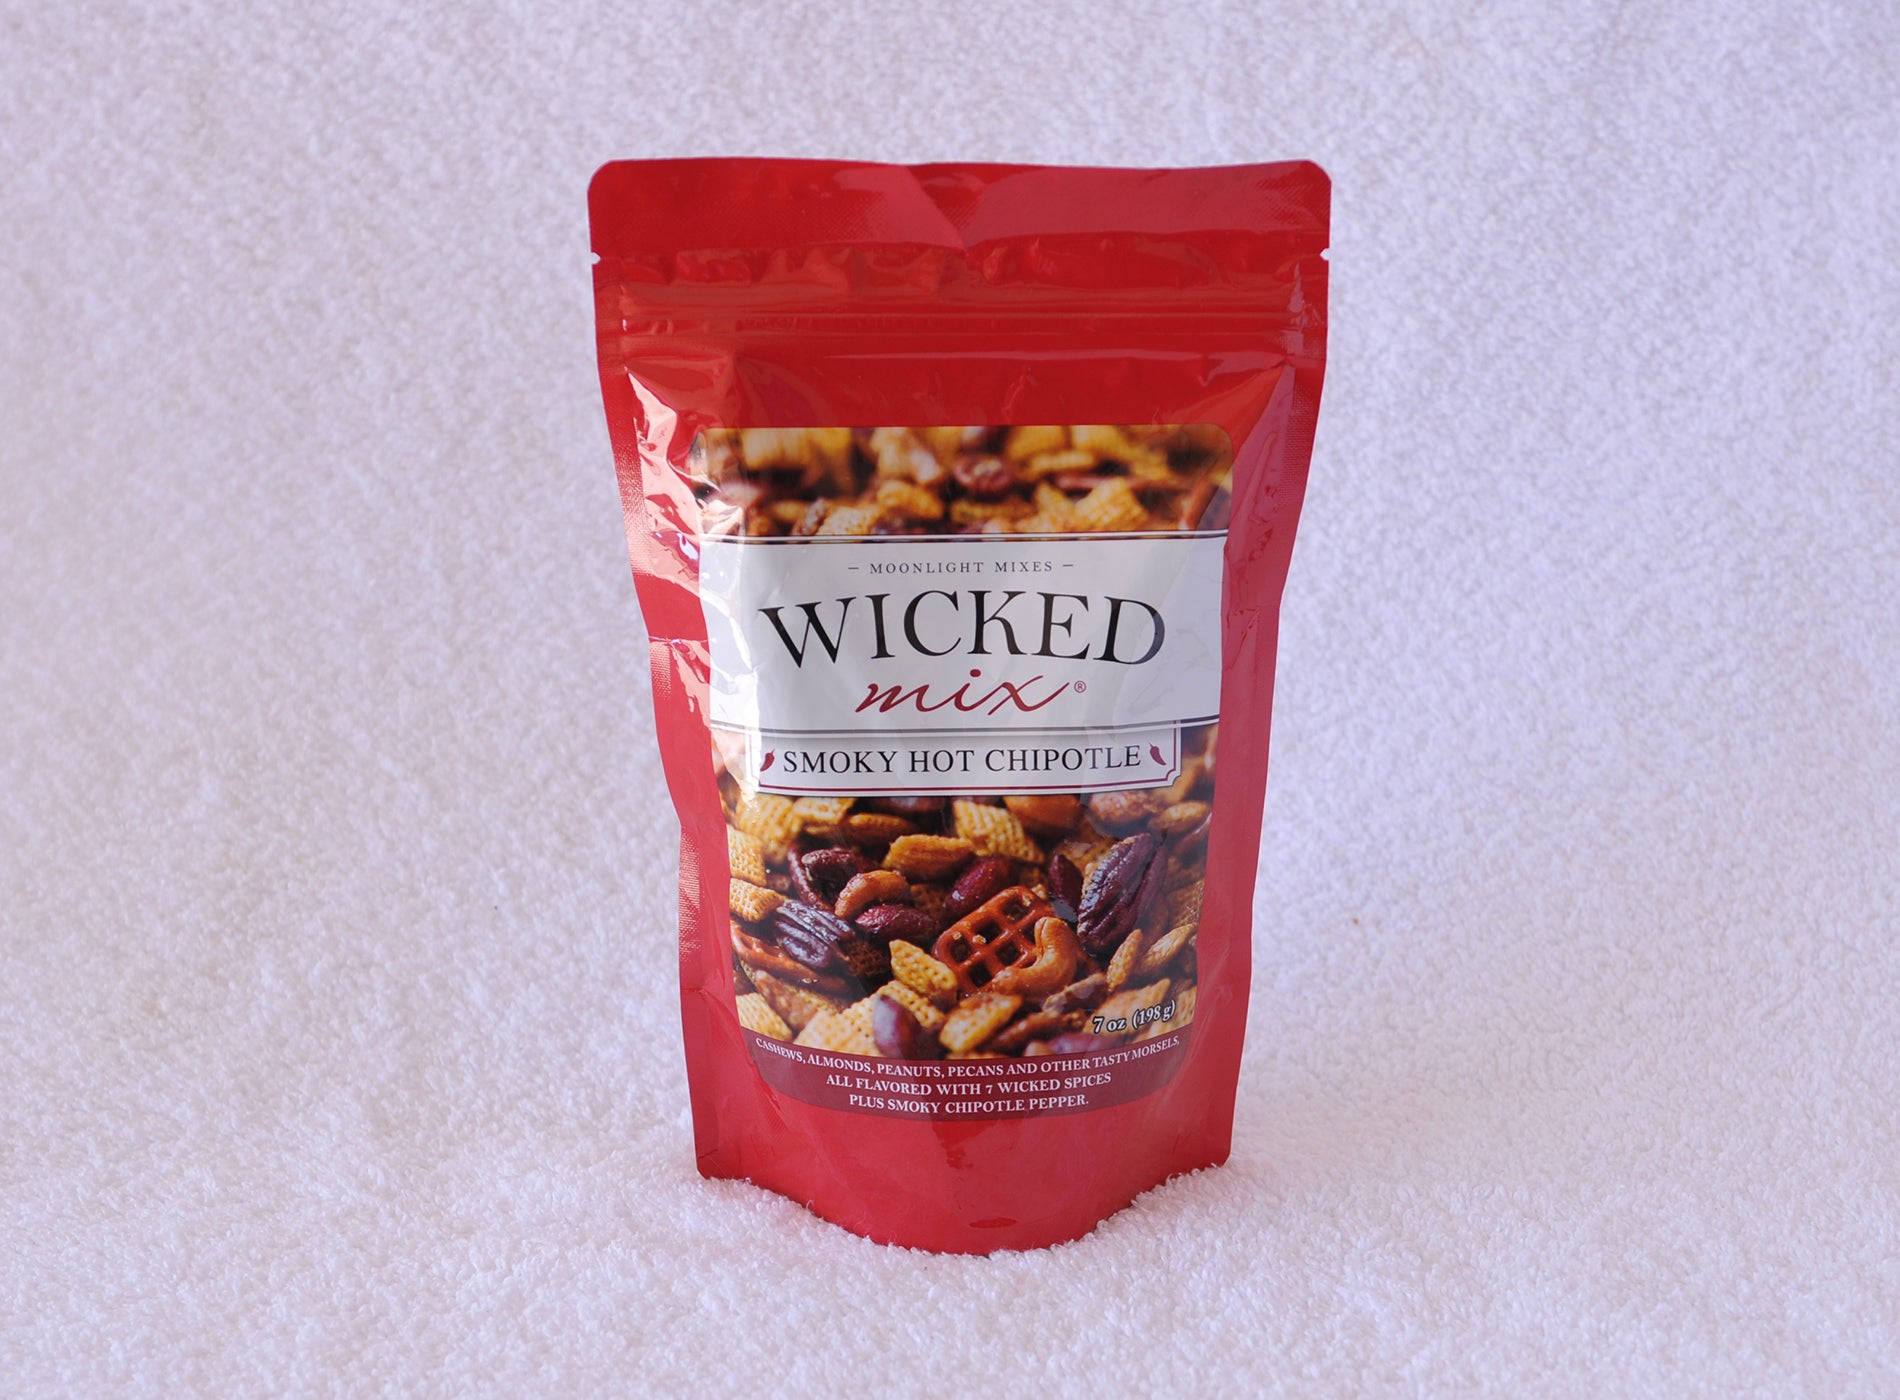 Wicked Mix - Smoky Hot Chipotle